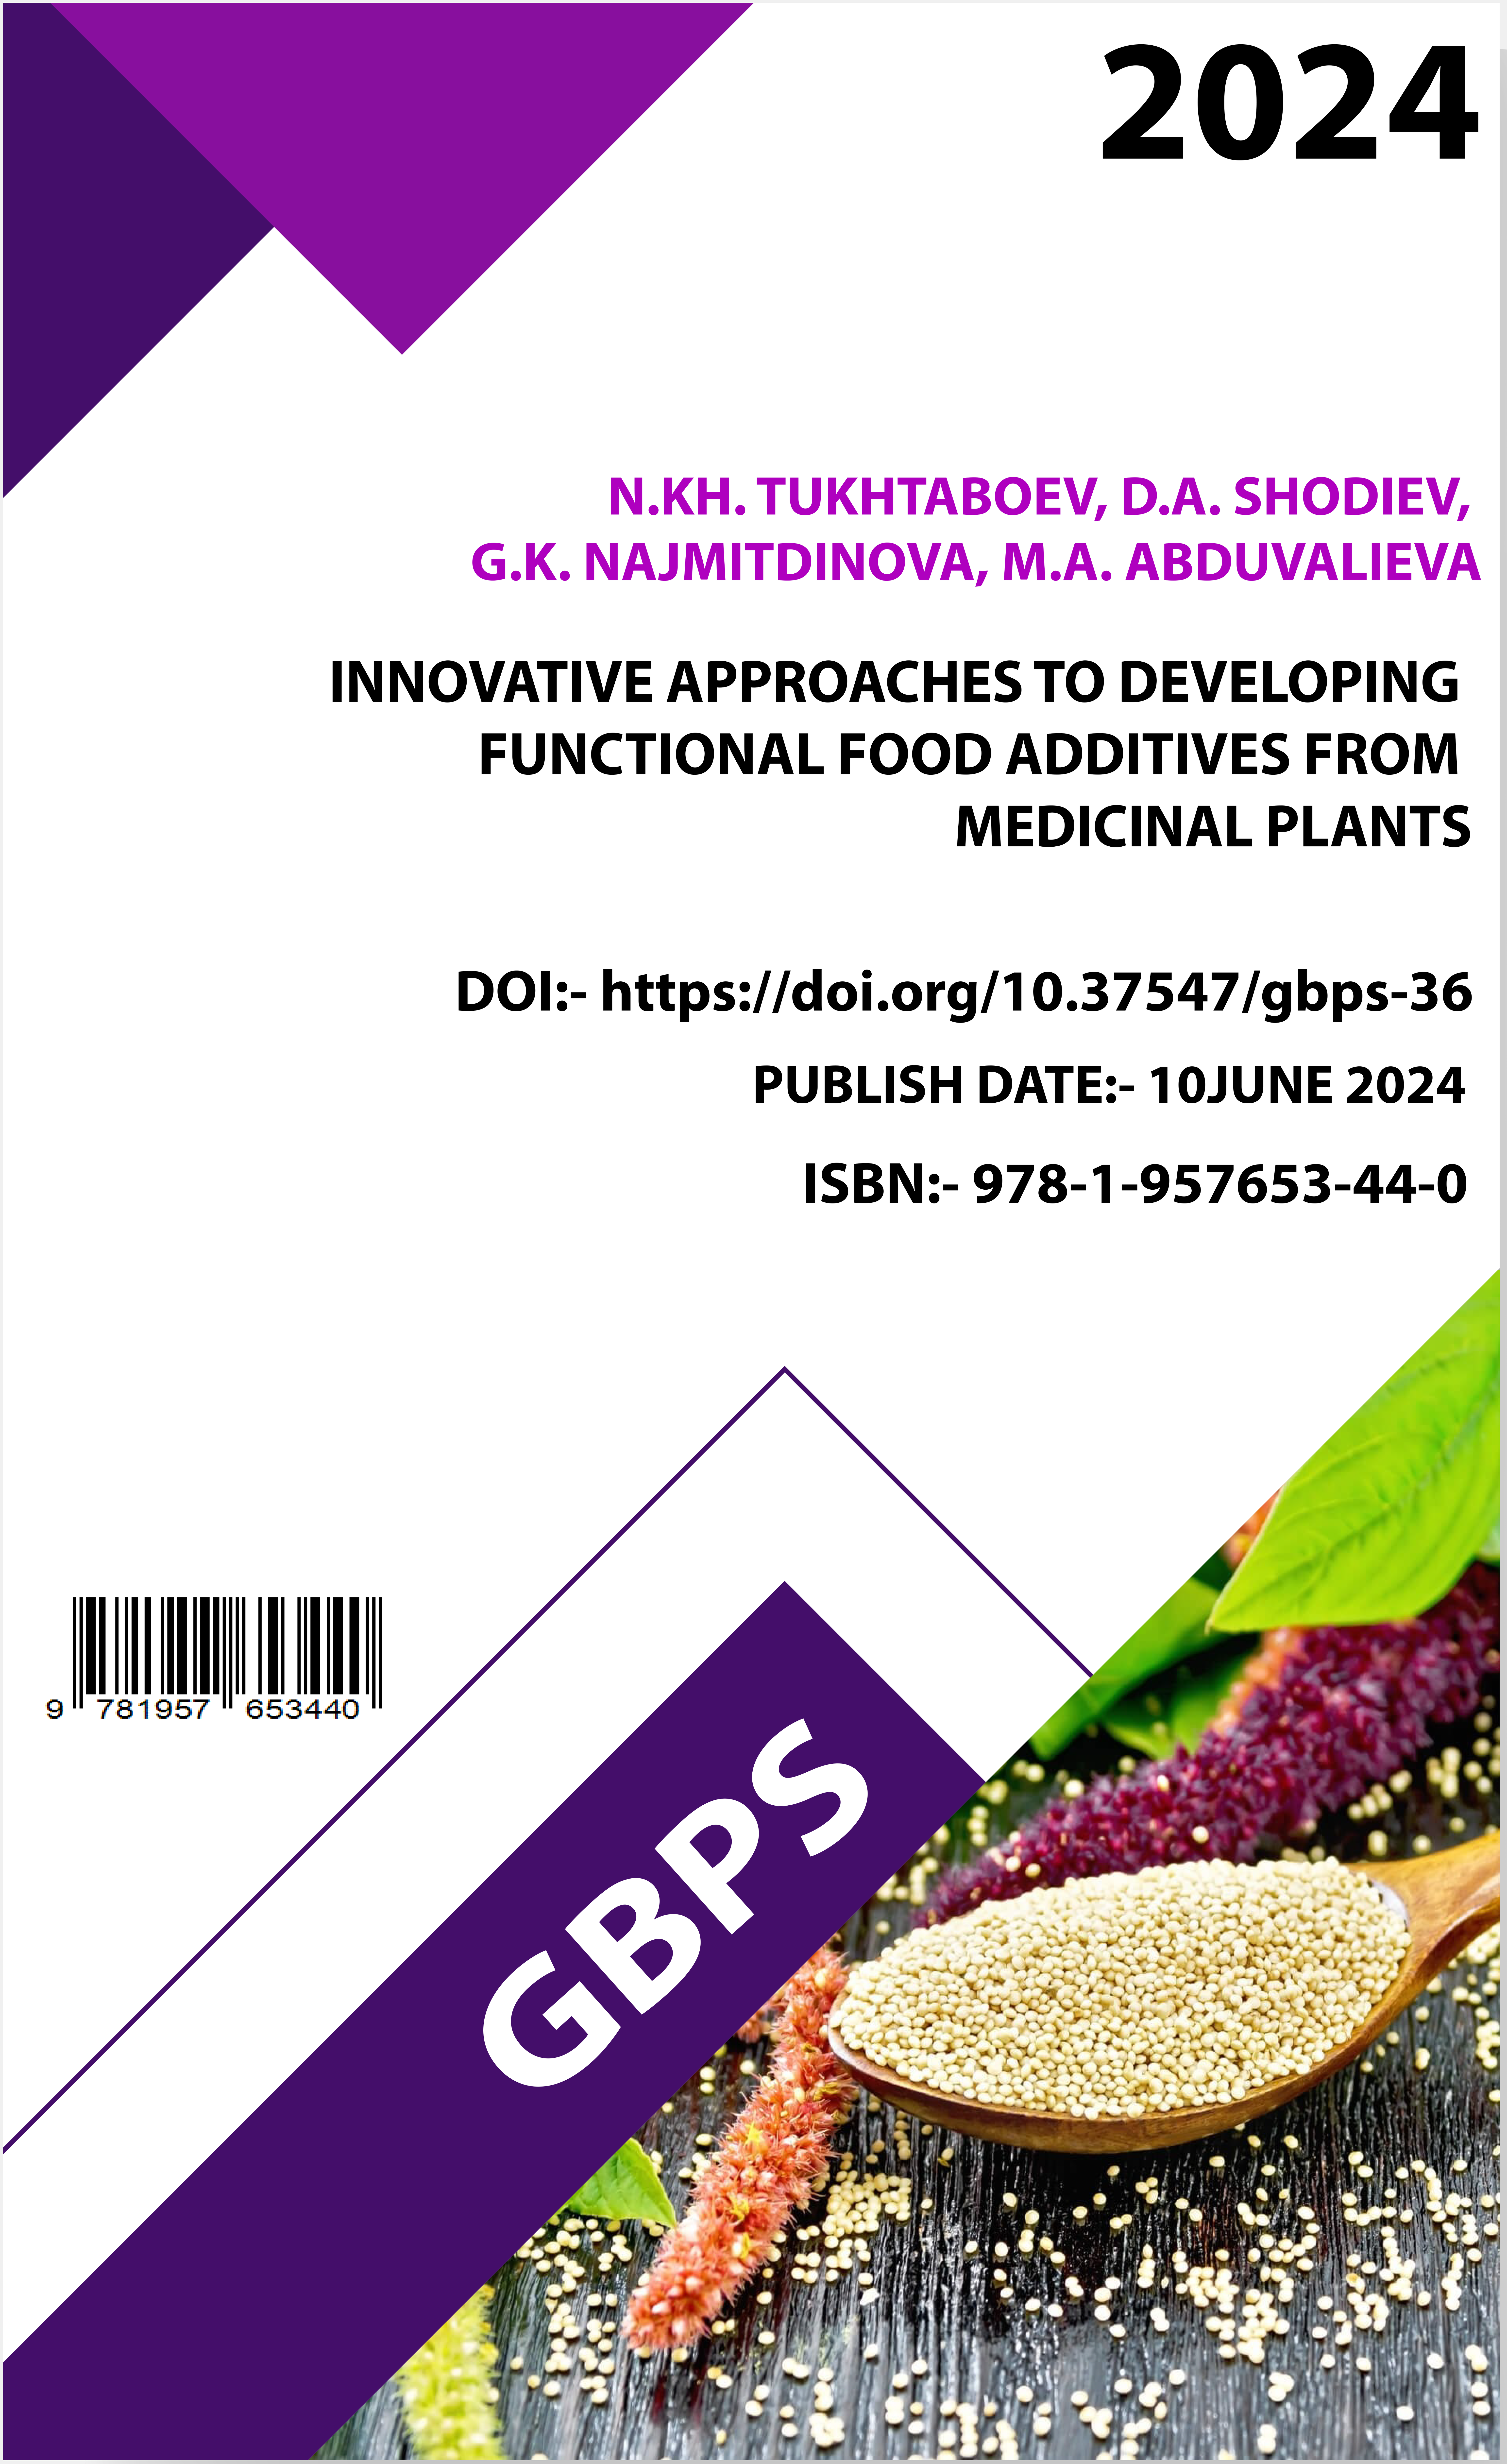 					View INNOVATIVE APPROACHES TO DEVELOPING FUNCTIONAL FOOD ADDITIVES FROM MEDICINAL PLANTS
				